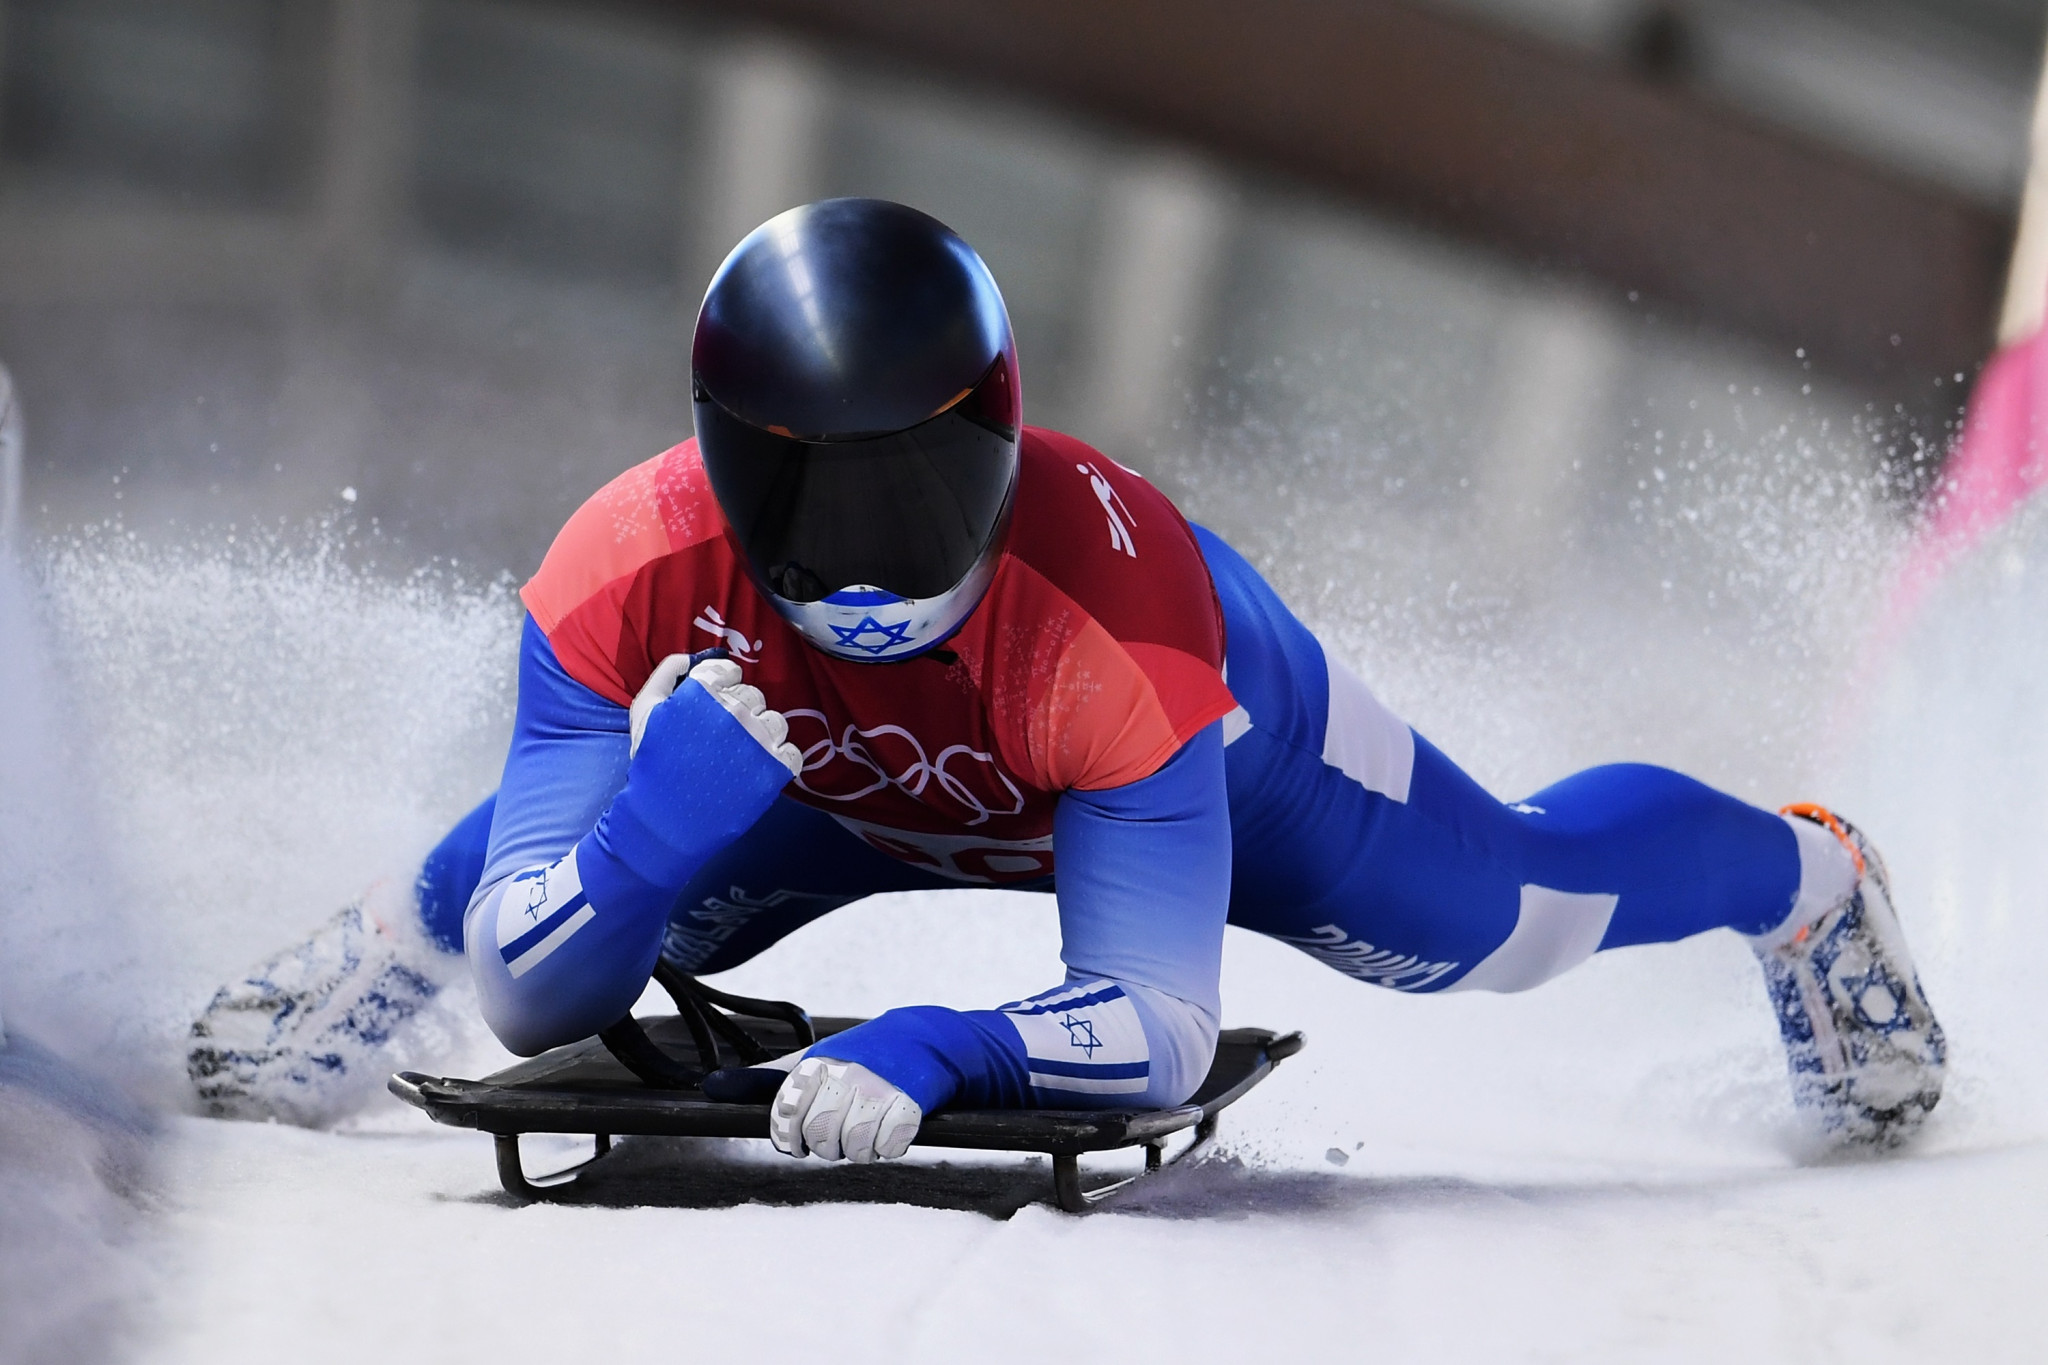 Adam Edelman represented Israel in the men's skeleton at Pyeonchang 2018 but has lost his appeal for a place in the two-man bobsleigh at Beijing 2022 ©Getty Images